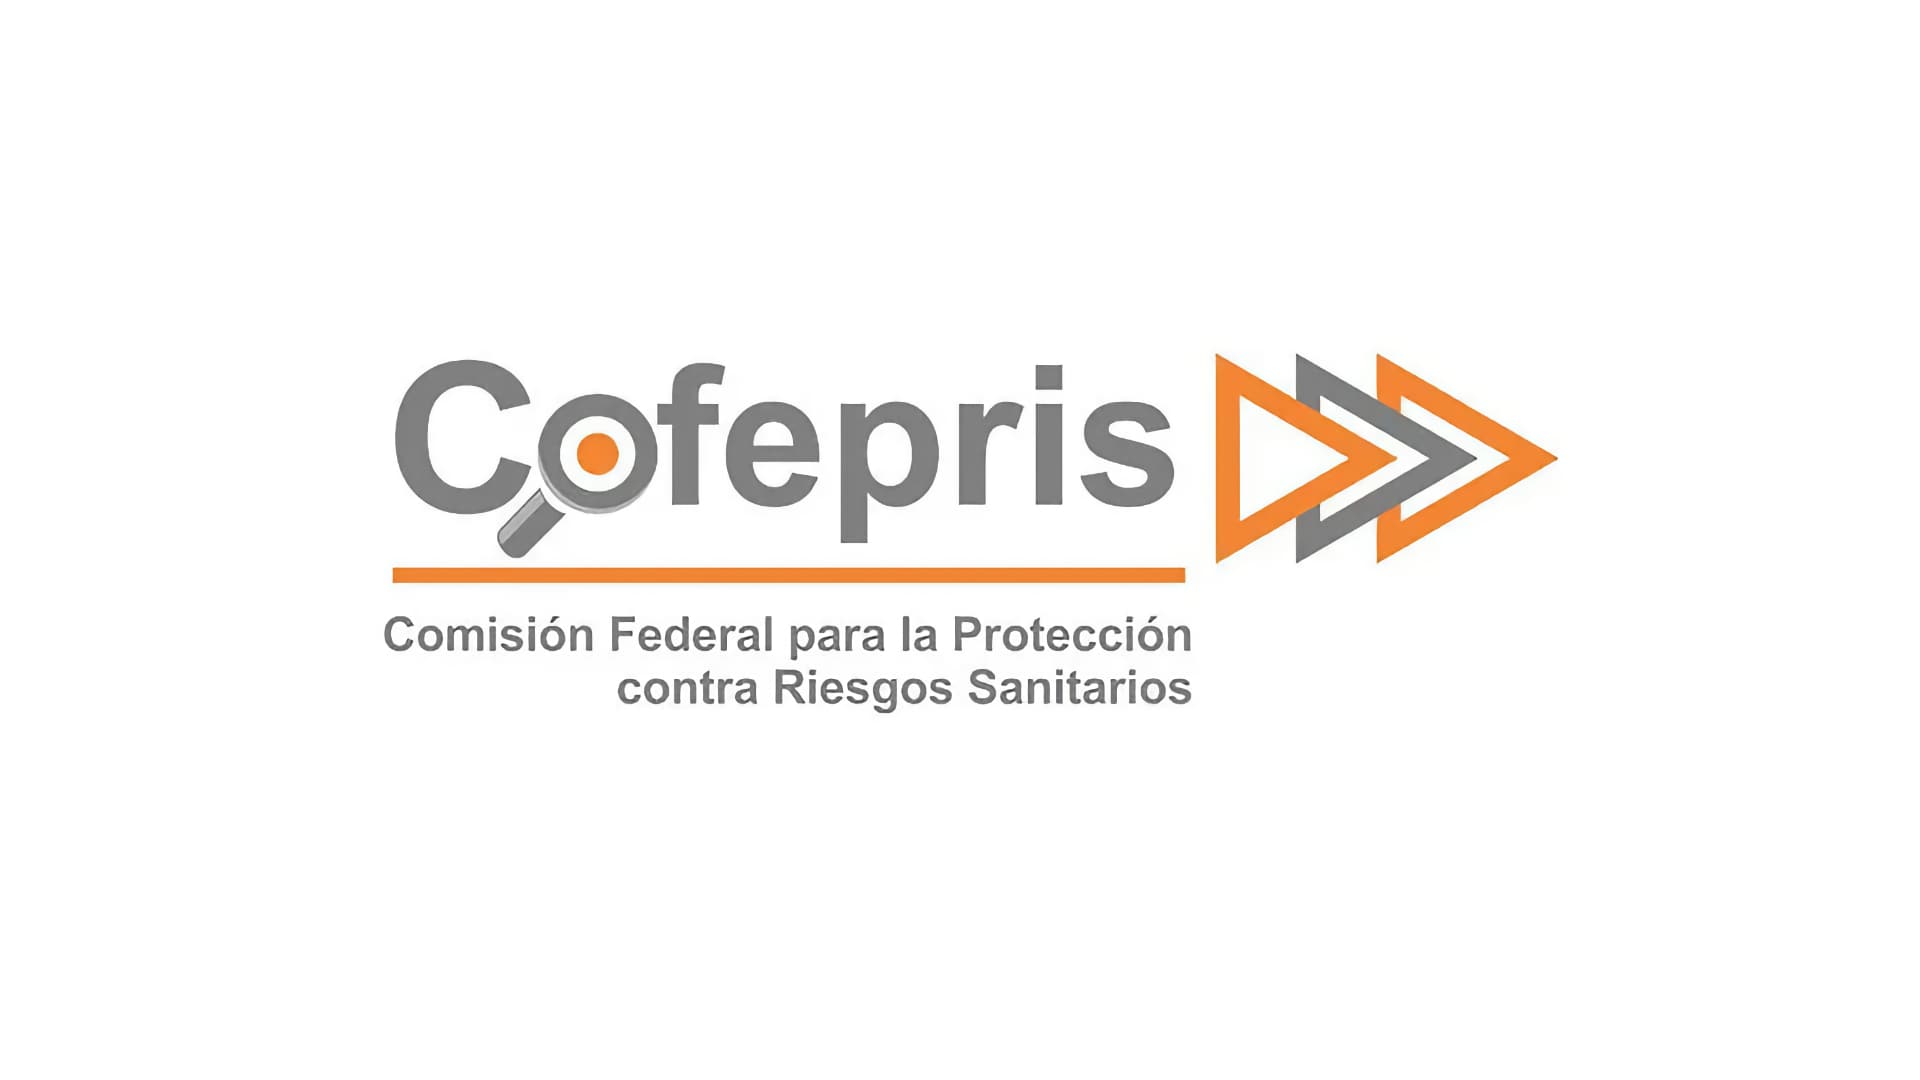 Cofepris alerts for the illegal sale of antivirals for Covid-19